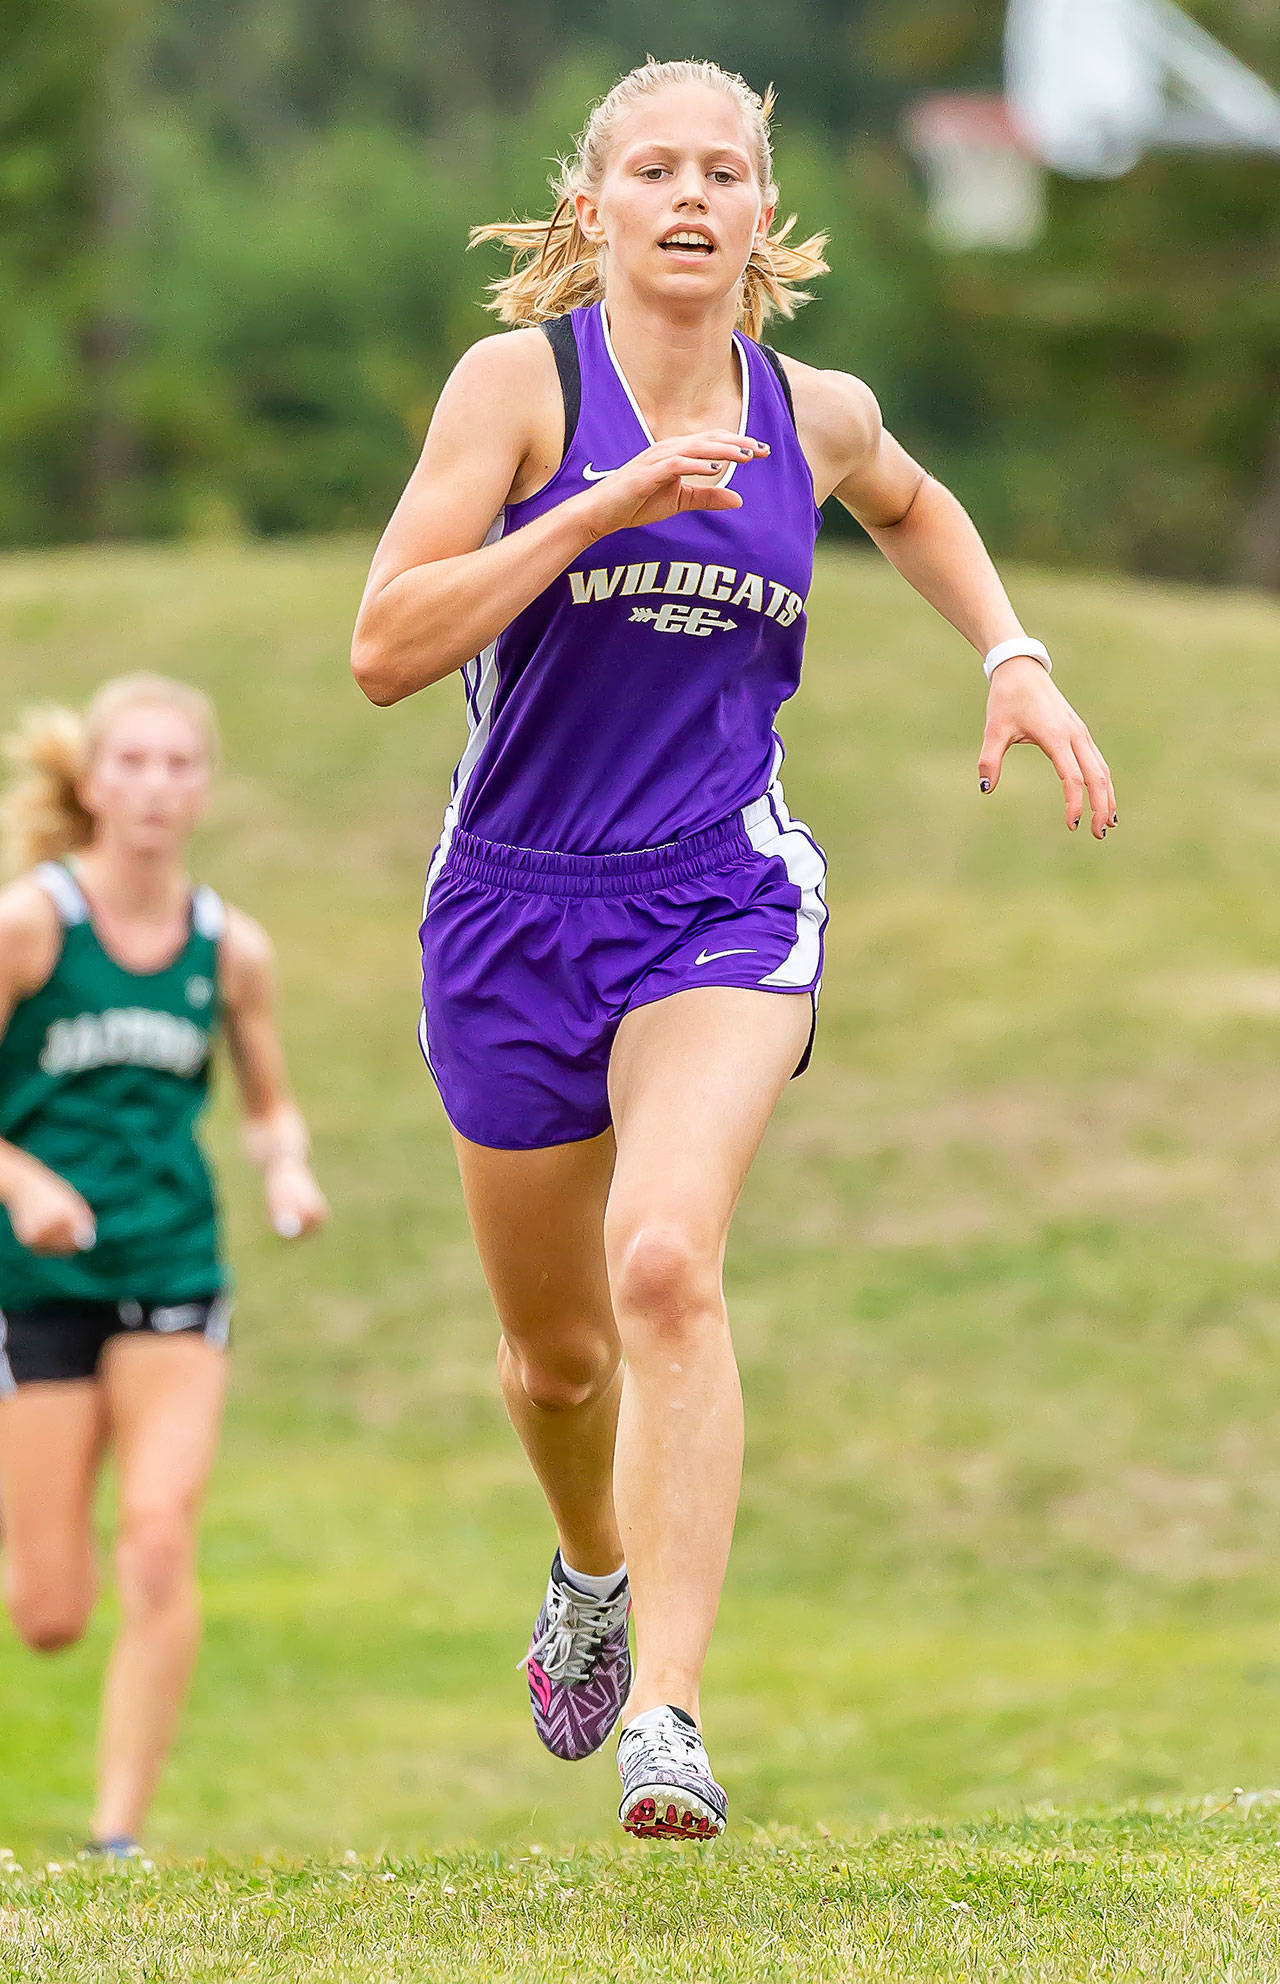 Natalie French, who took sixth overall, was second among Oak Harbor girls.(Photo by John Fisken)